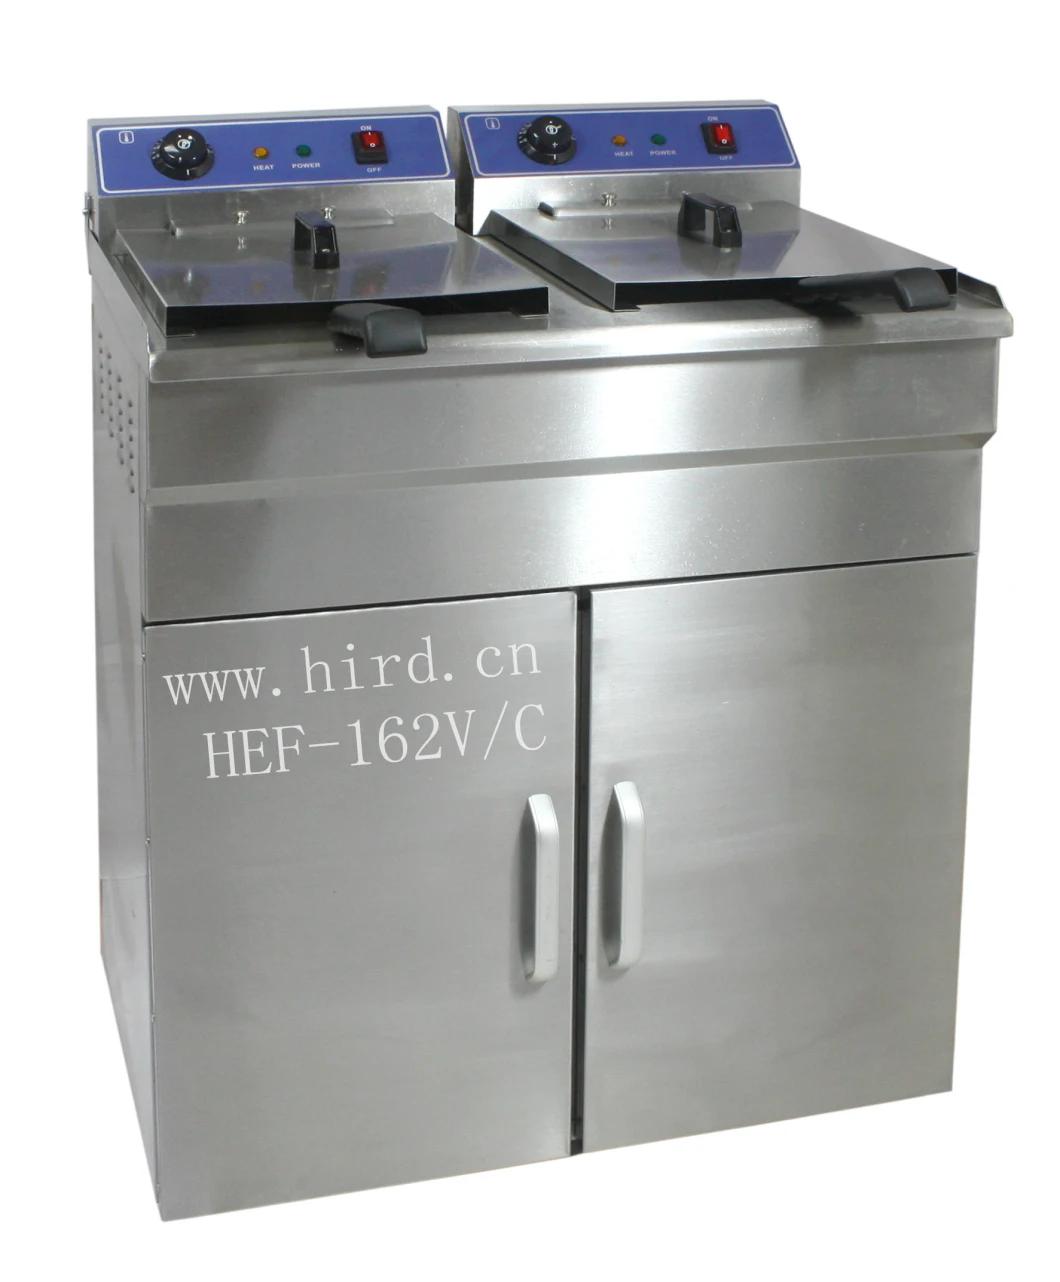 Electric Deep Fryer (WF-162V/C) with Cabinet